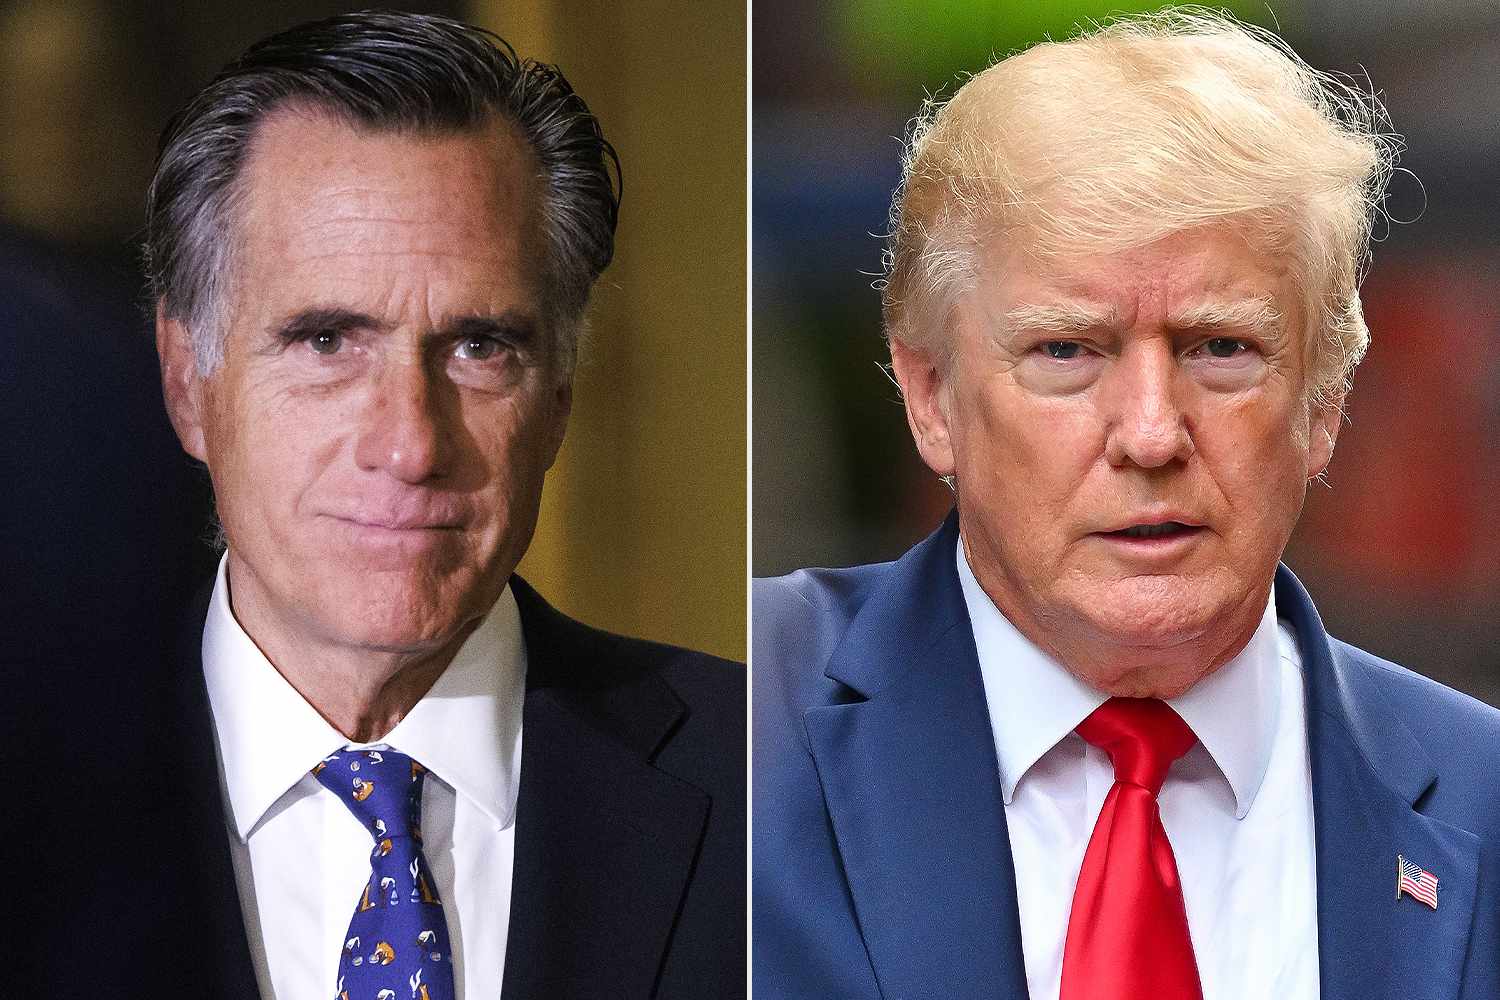 mitt romney explains why he would ‘absolutely not’ vote for trump over biden